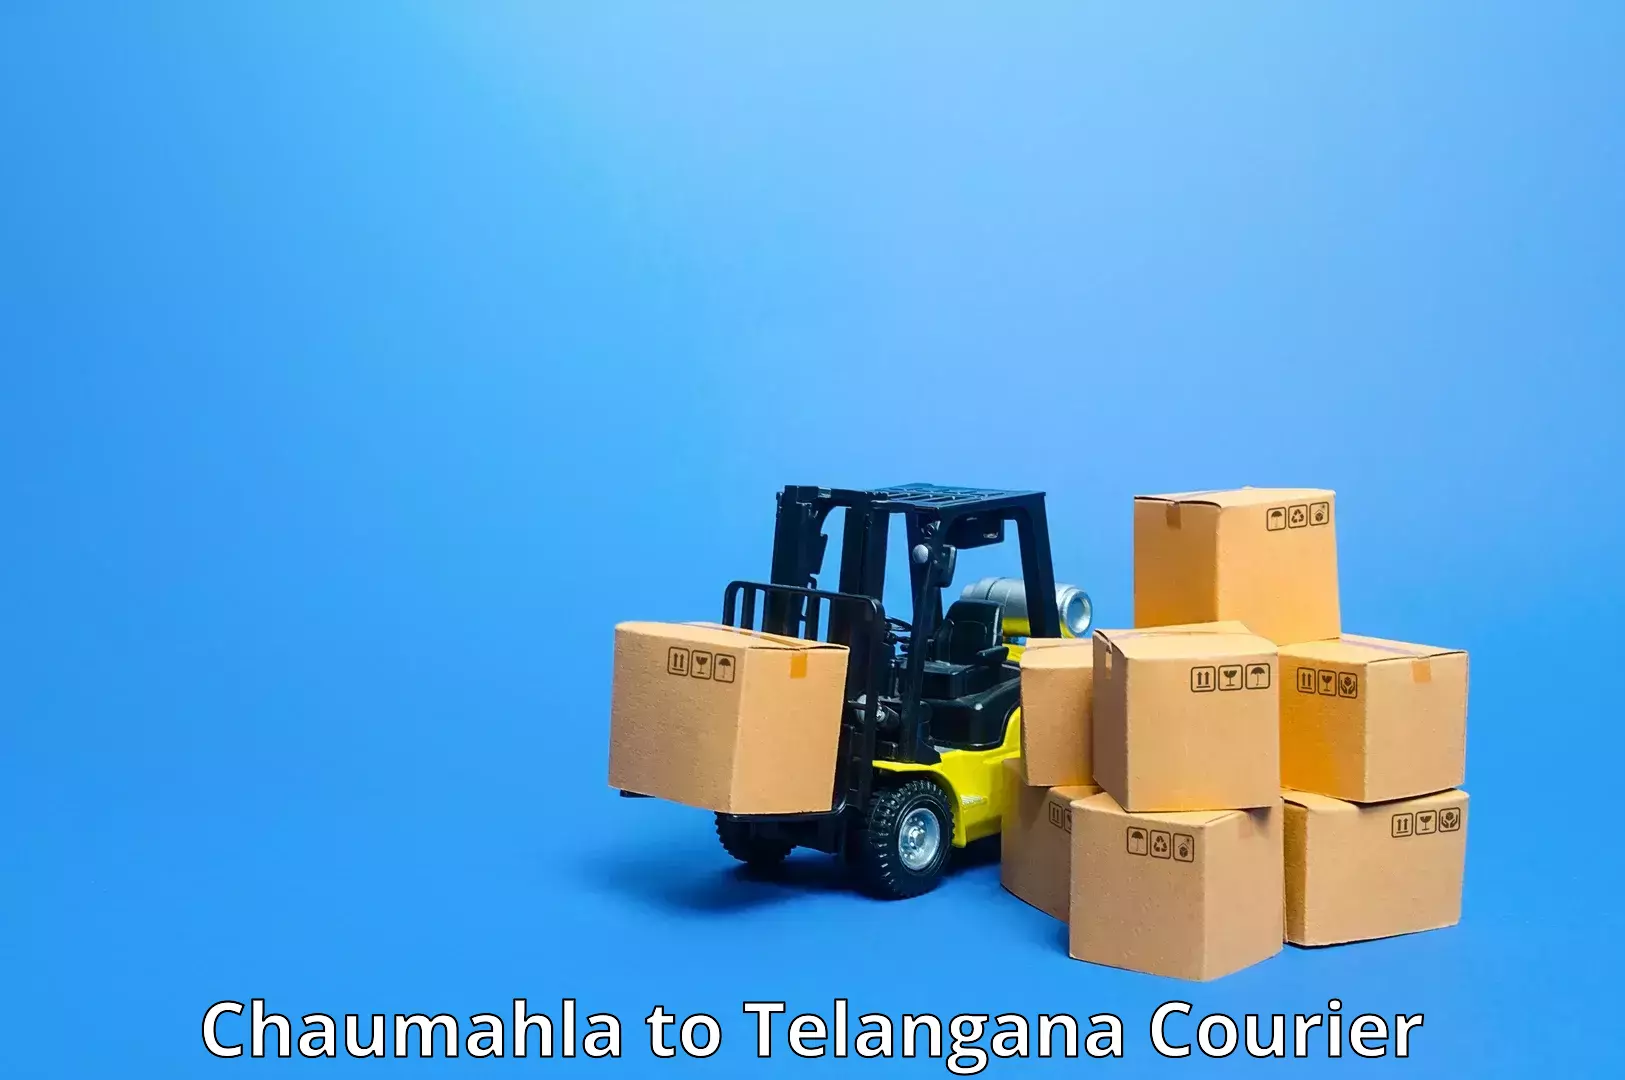 Express delivery capabilities in Chaumahla to Hajipur Mancherial